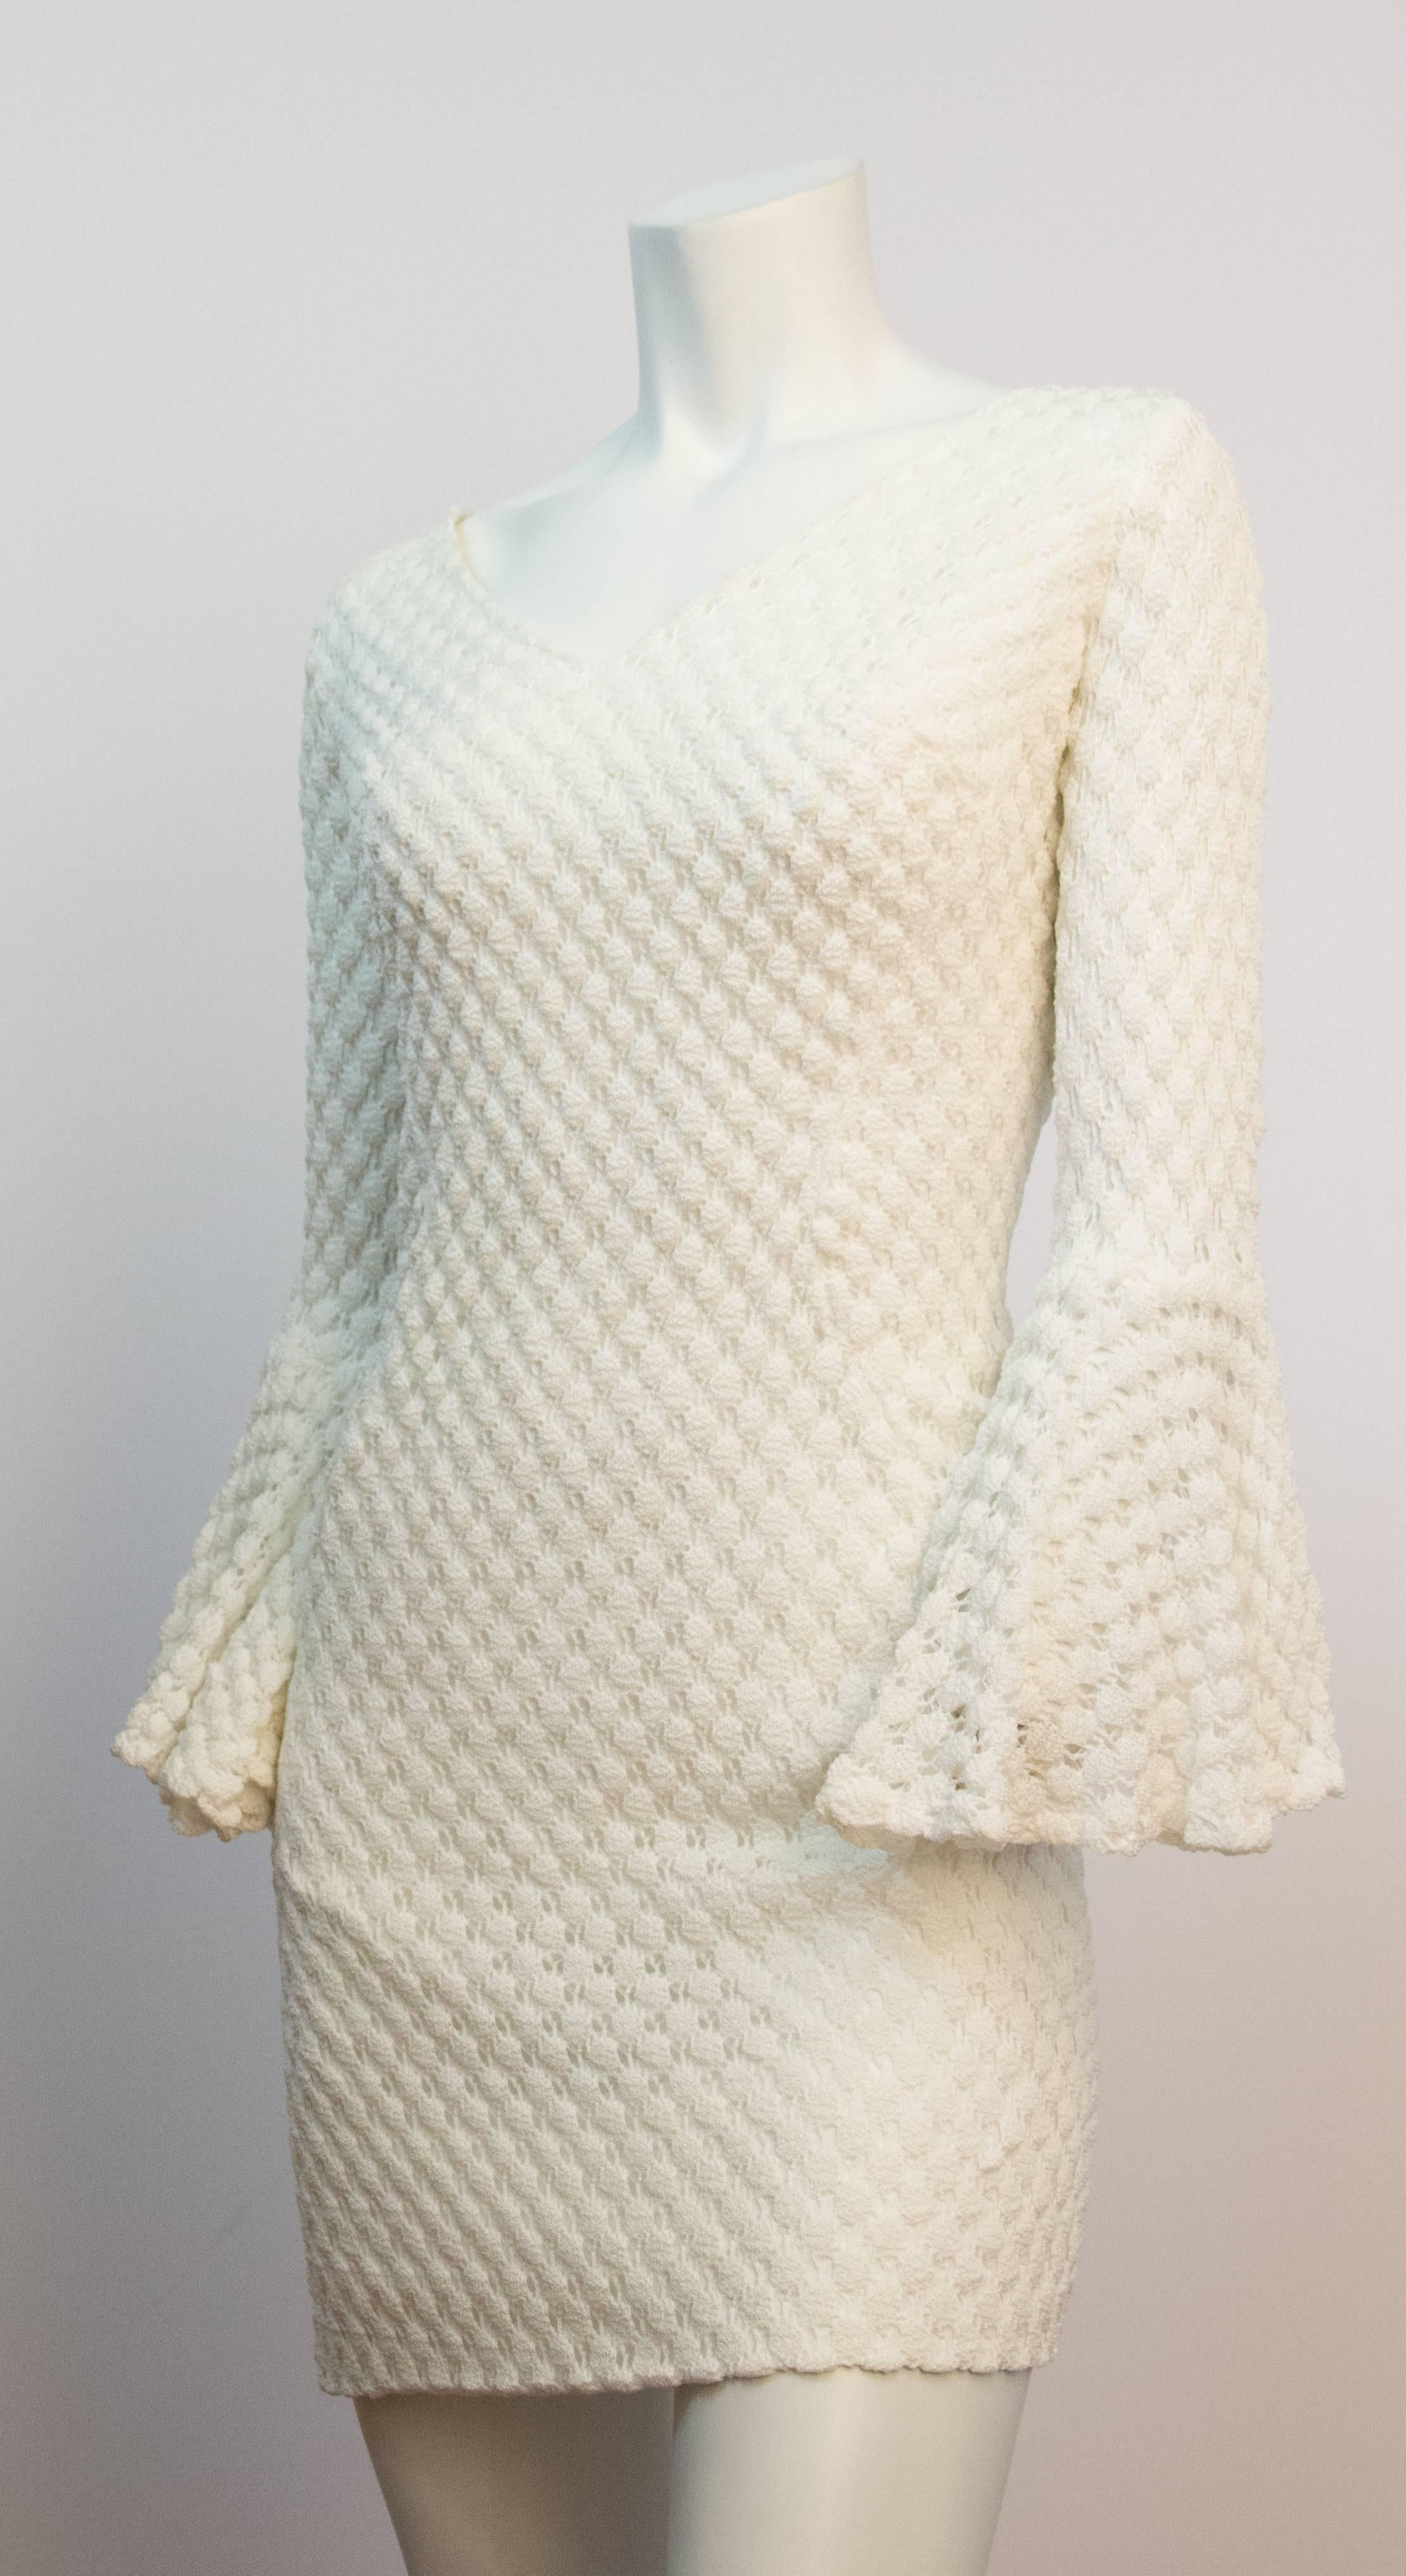 60s White Crochet Mini Dress with Bell Sleeves. Body of dress is lined, sleeves are not lined. Metal zipper up back. Fitted

